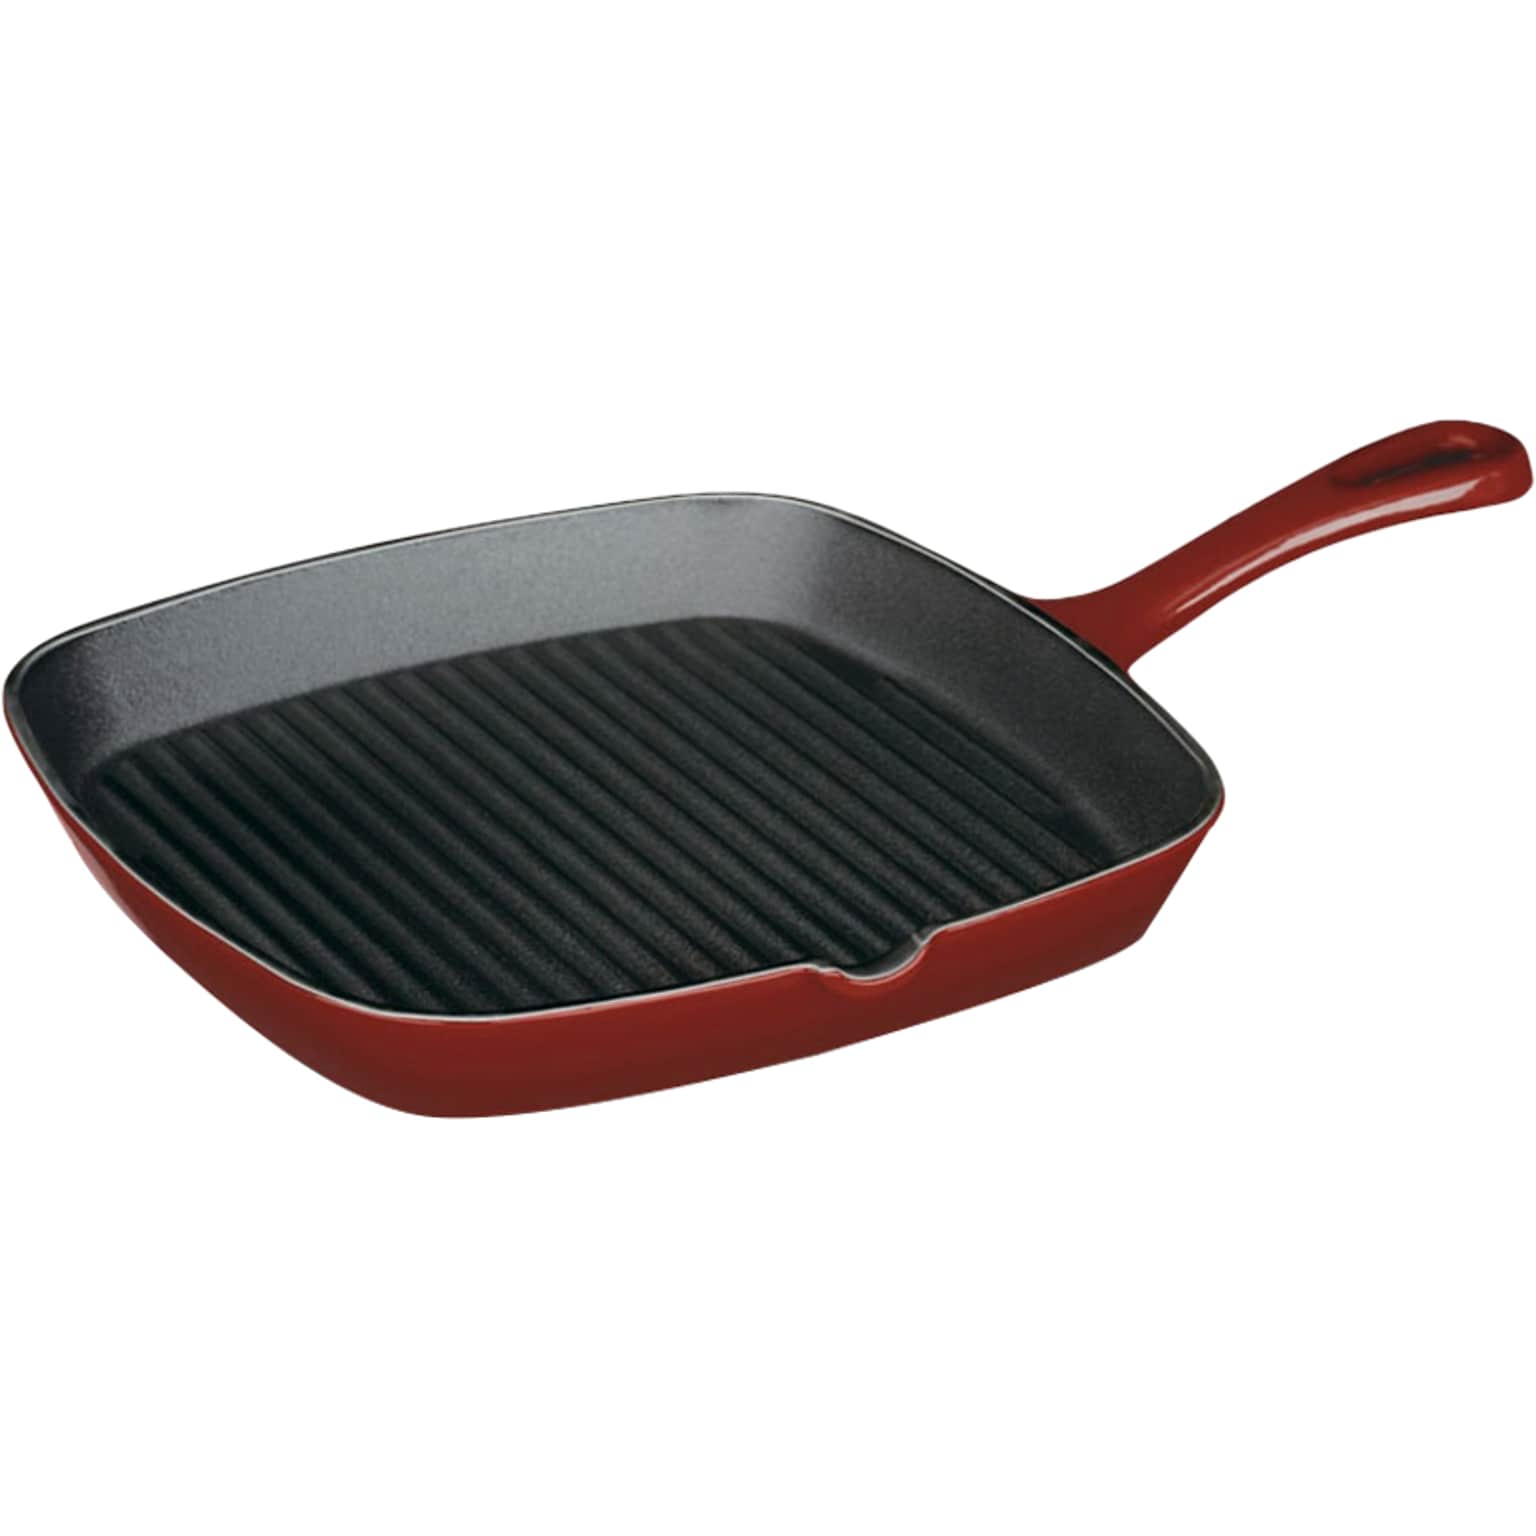 Cuisinart Chefs Classic Grill Pan, Cardinal Red (CI30-23CR)